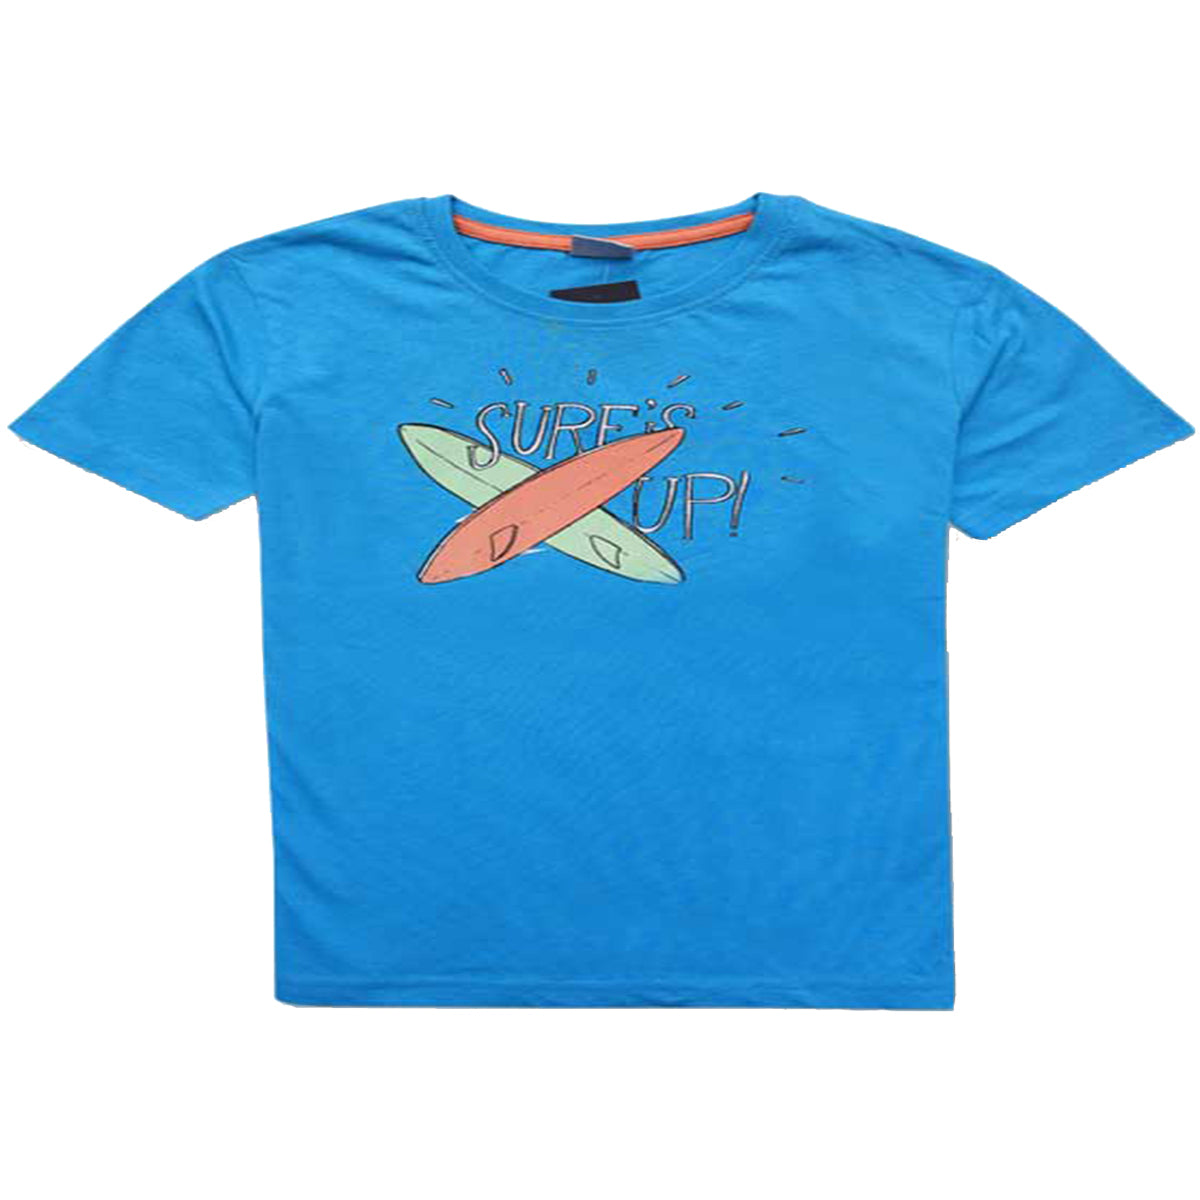 Boy's sky blue t-shirt with a 'Surf's Up' surfboard design for a fun and sporty summer look.